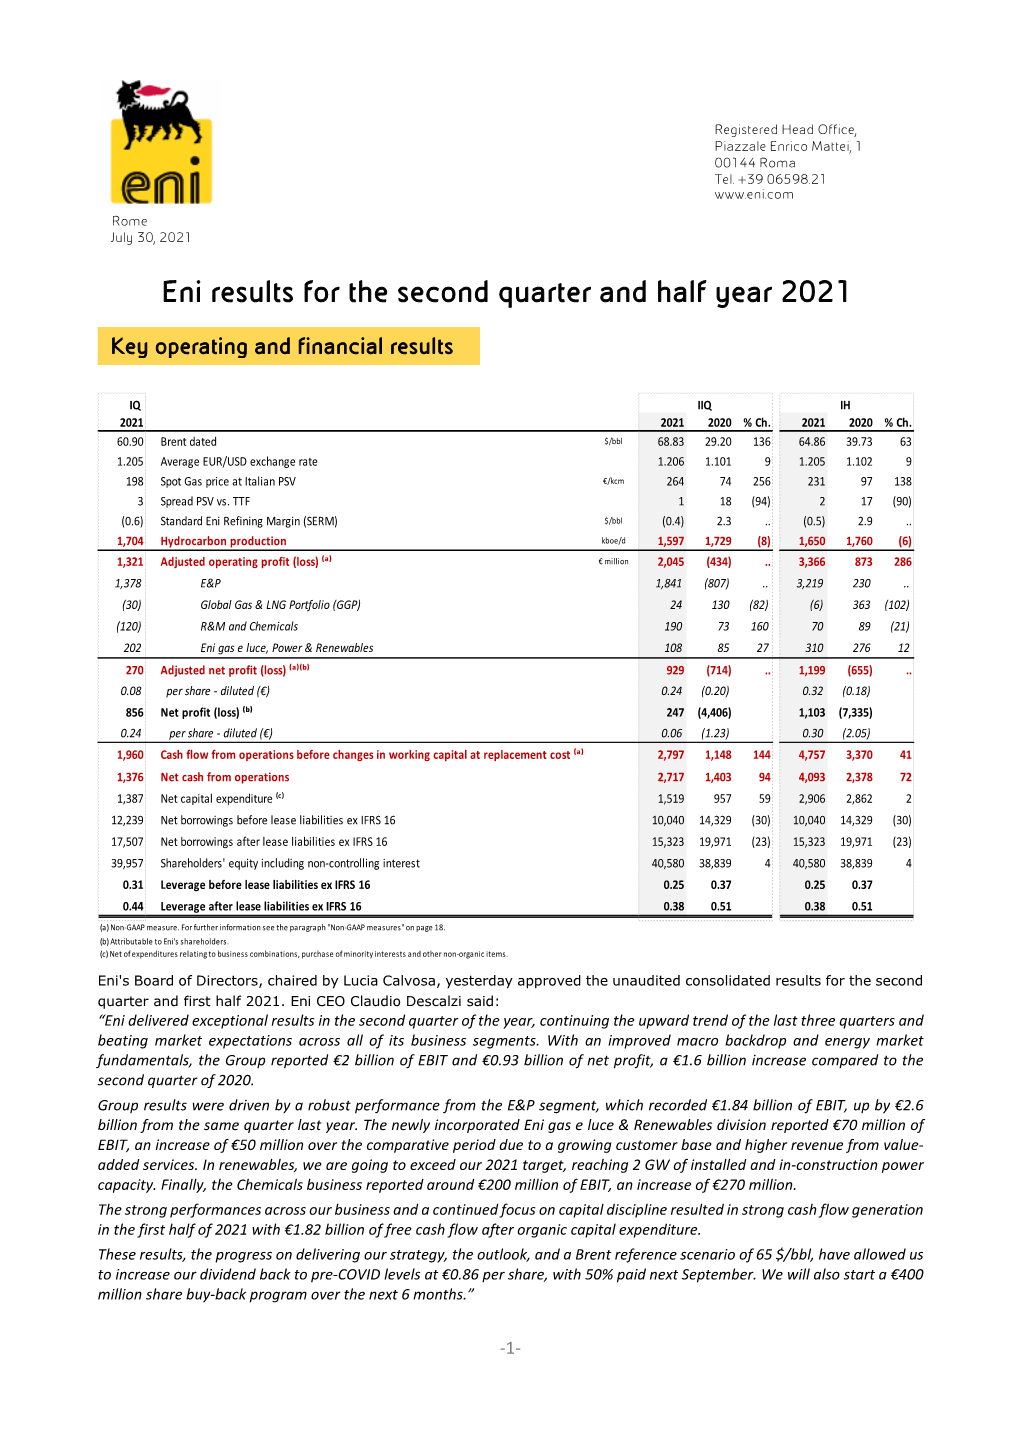 Eni Results for the Second Quarter and Half Year 2021